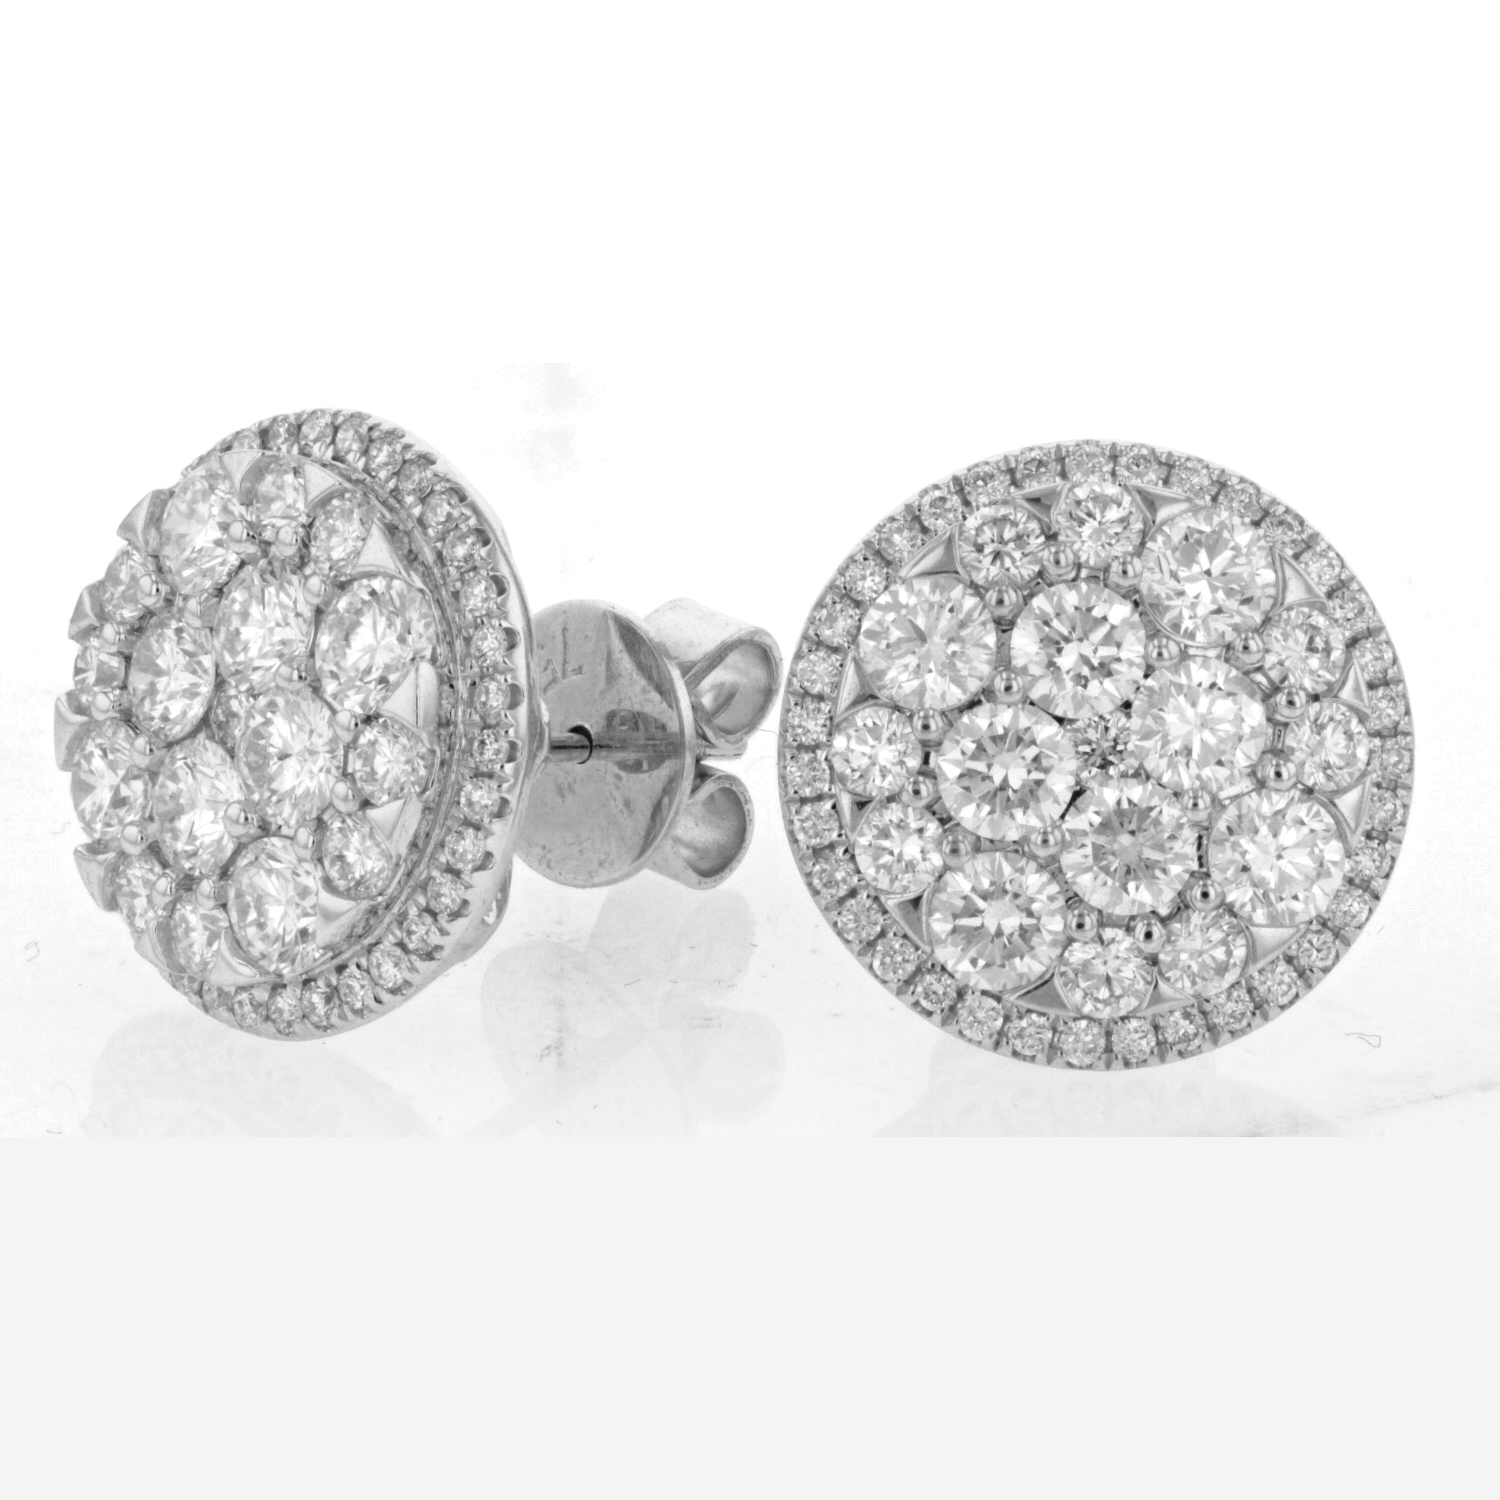 View 2.50ctw Diamond Cluster Studs in 18k White Gold